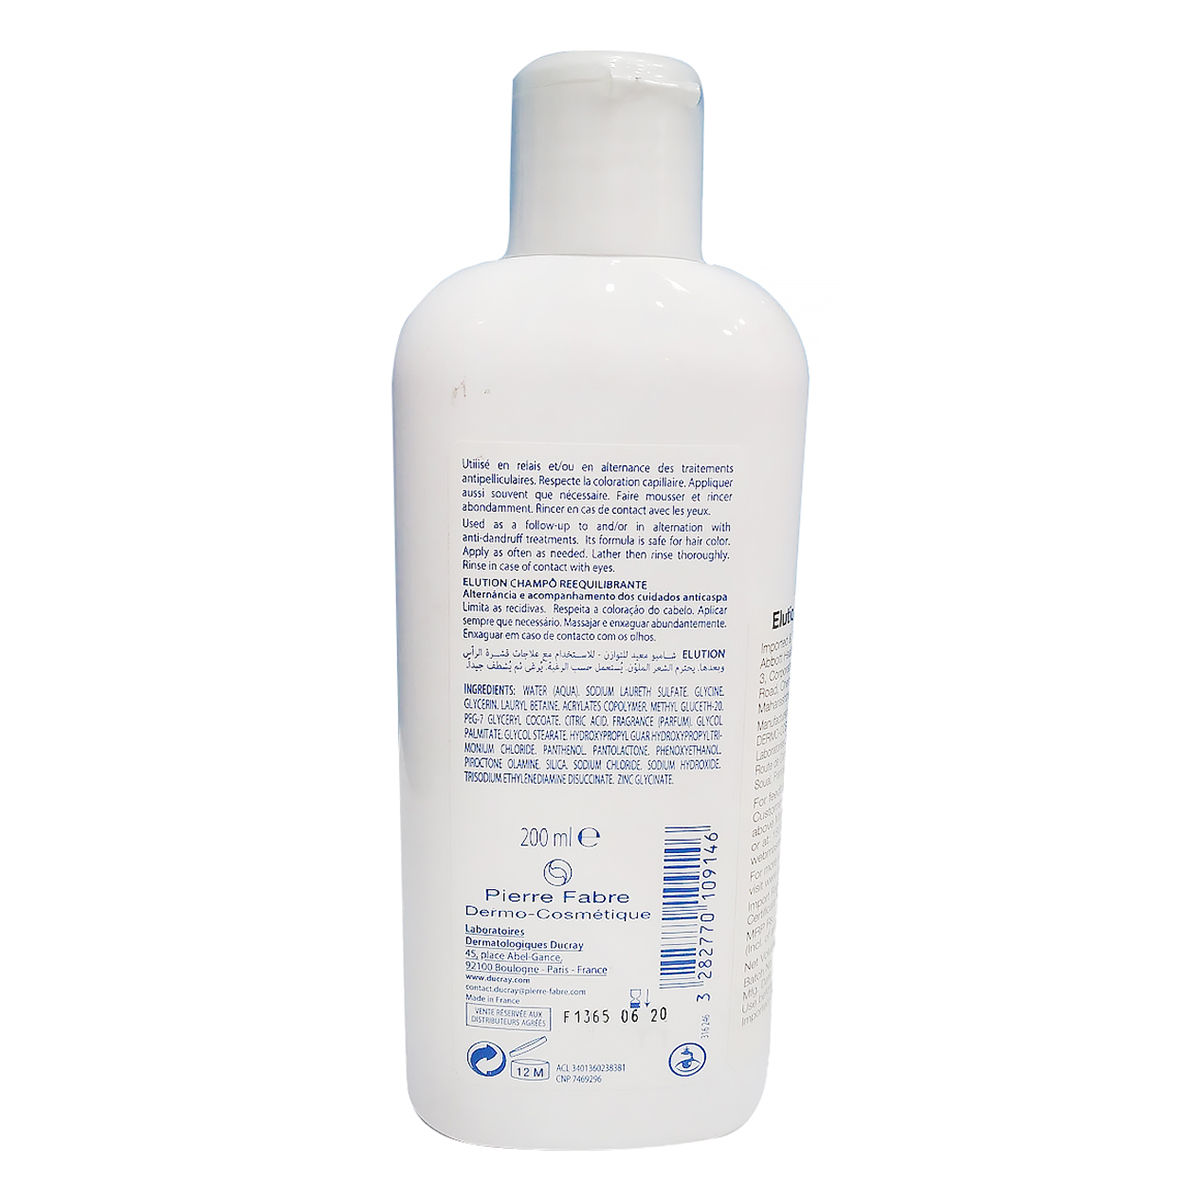 ristet brød Vær venlig Mince Ducray Elution Rebalancing Shampoo, 200 ml Price, Uses, Side Effects,  Composition - Apollo Pharmacy